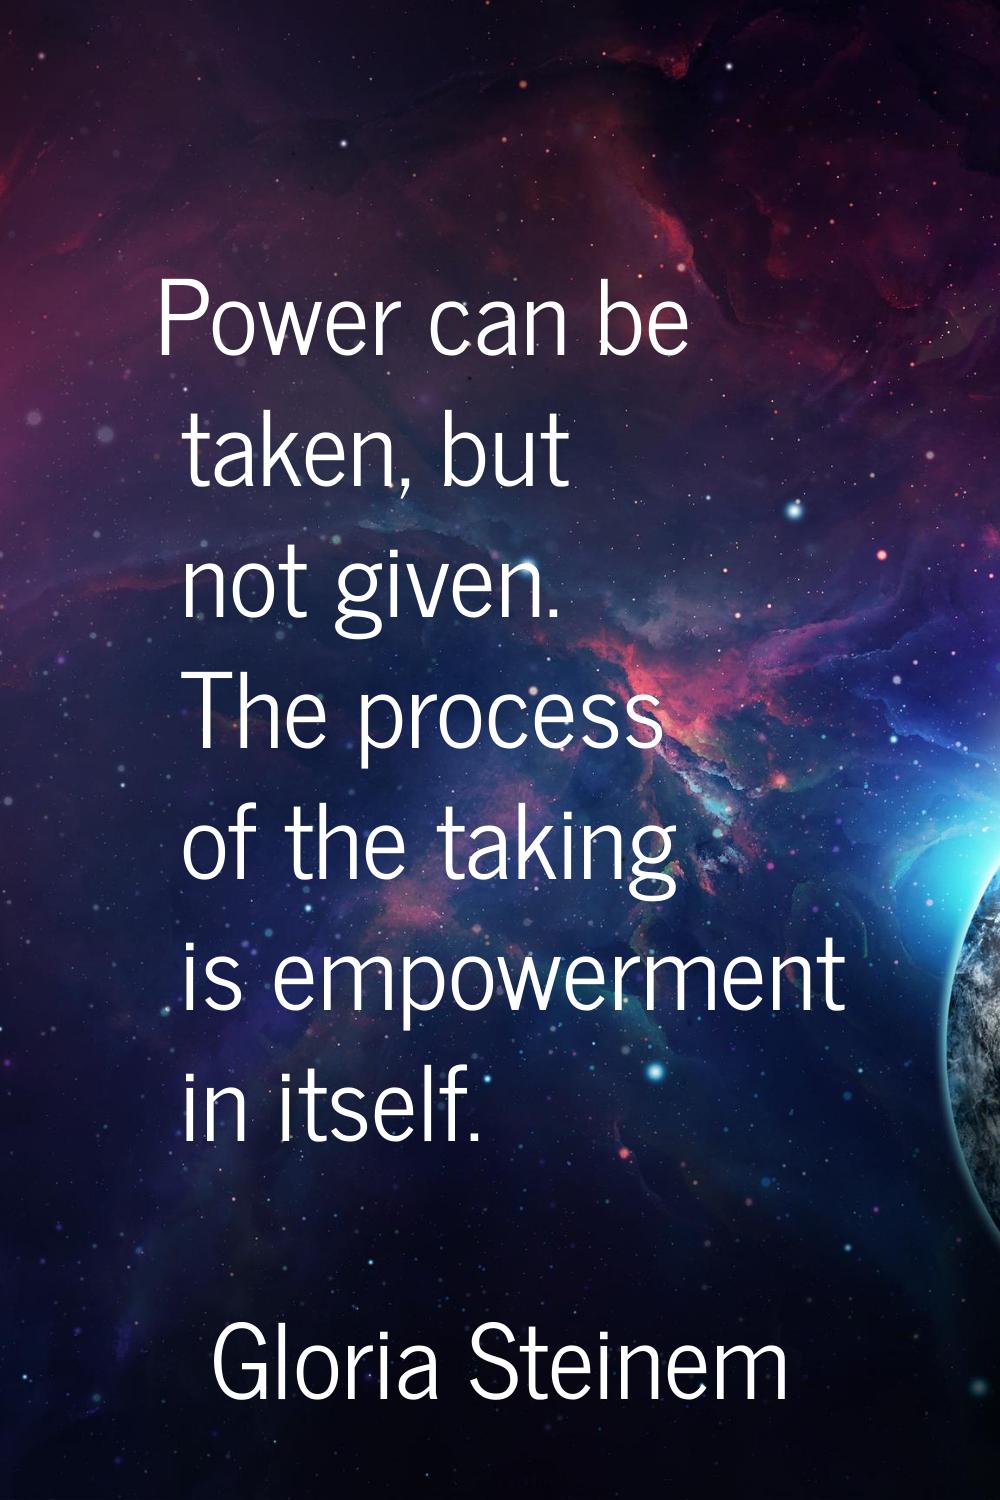 Power can be taken, but not given. The process of the taking is empowerment in itself.